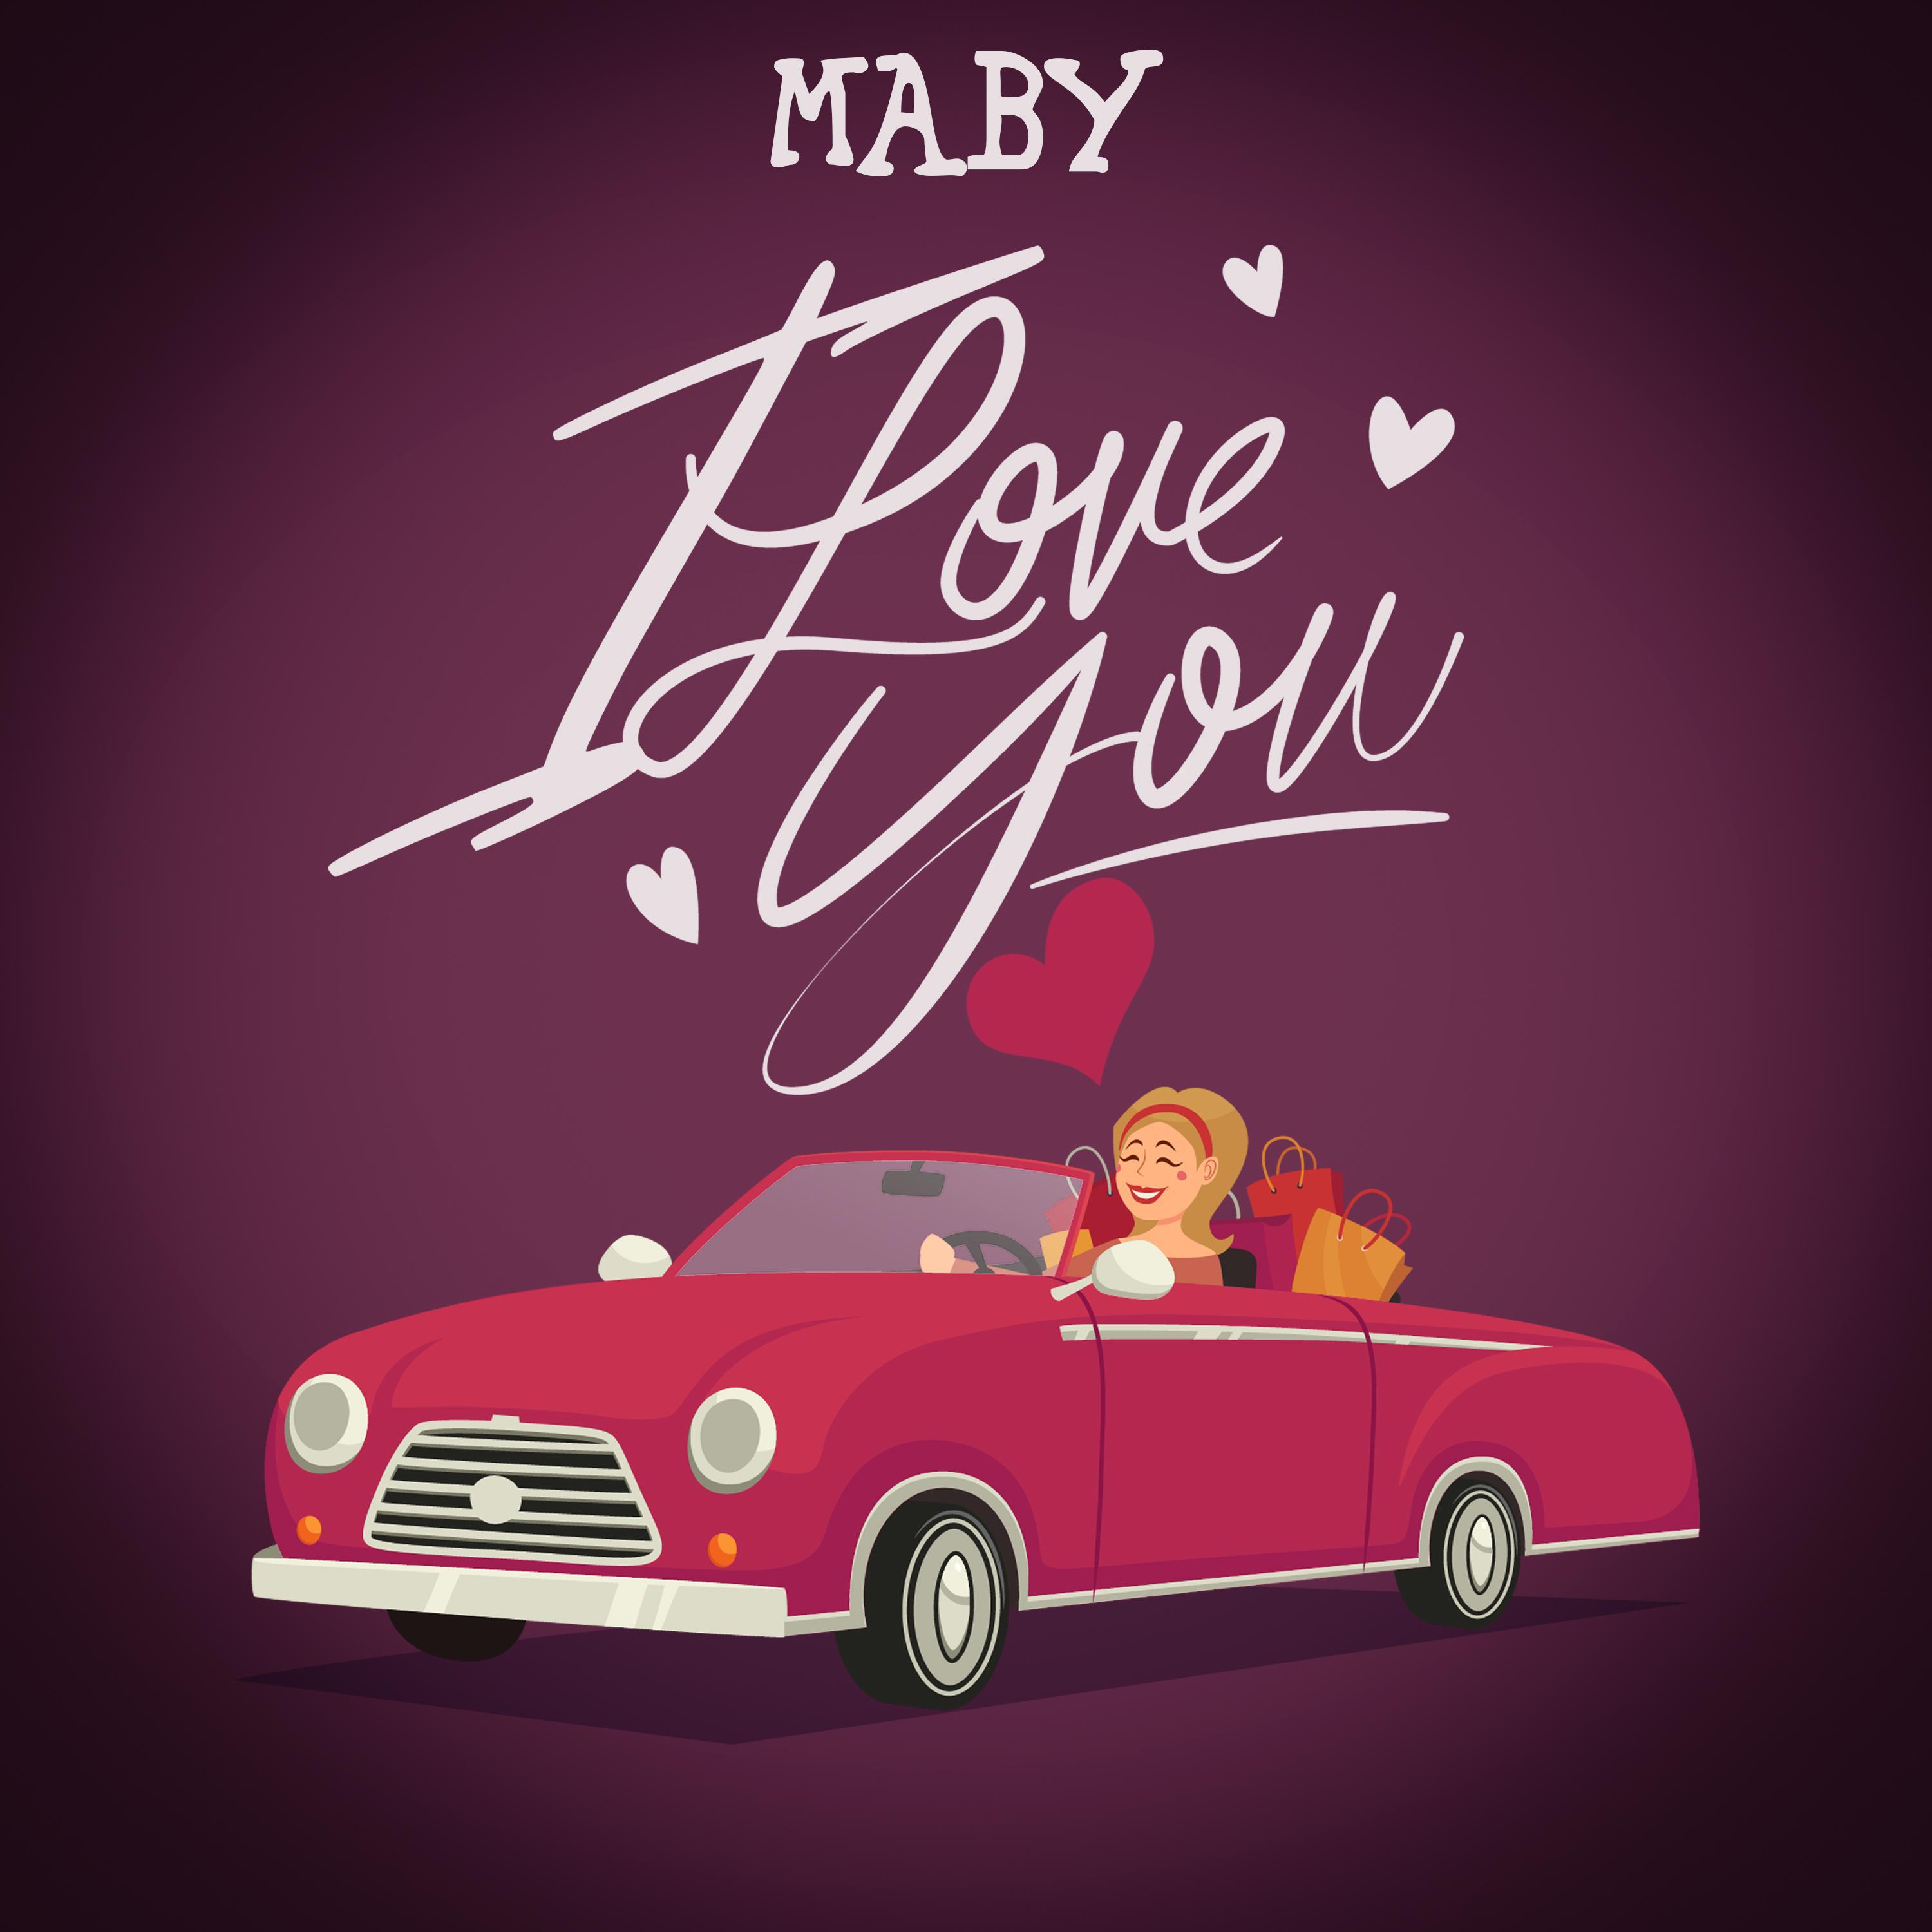 Maby - I love you